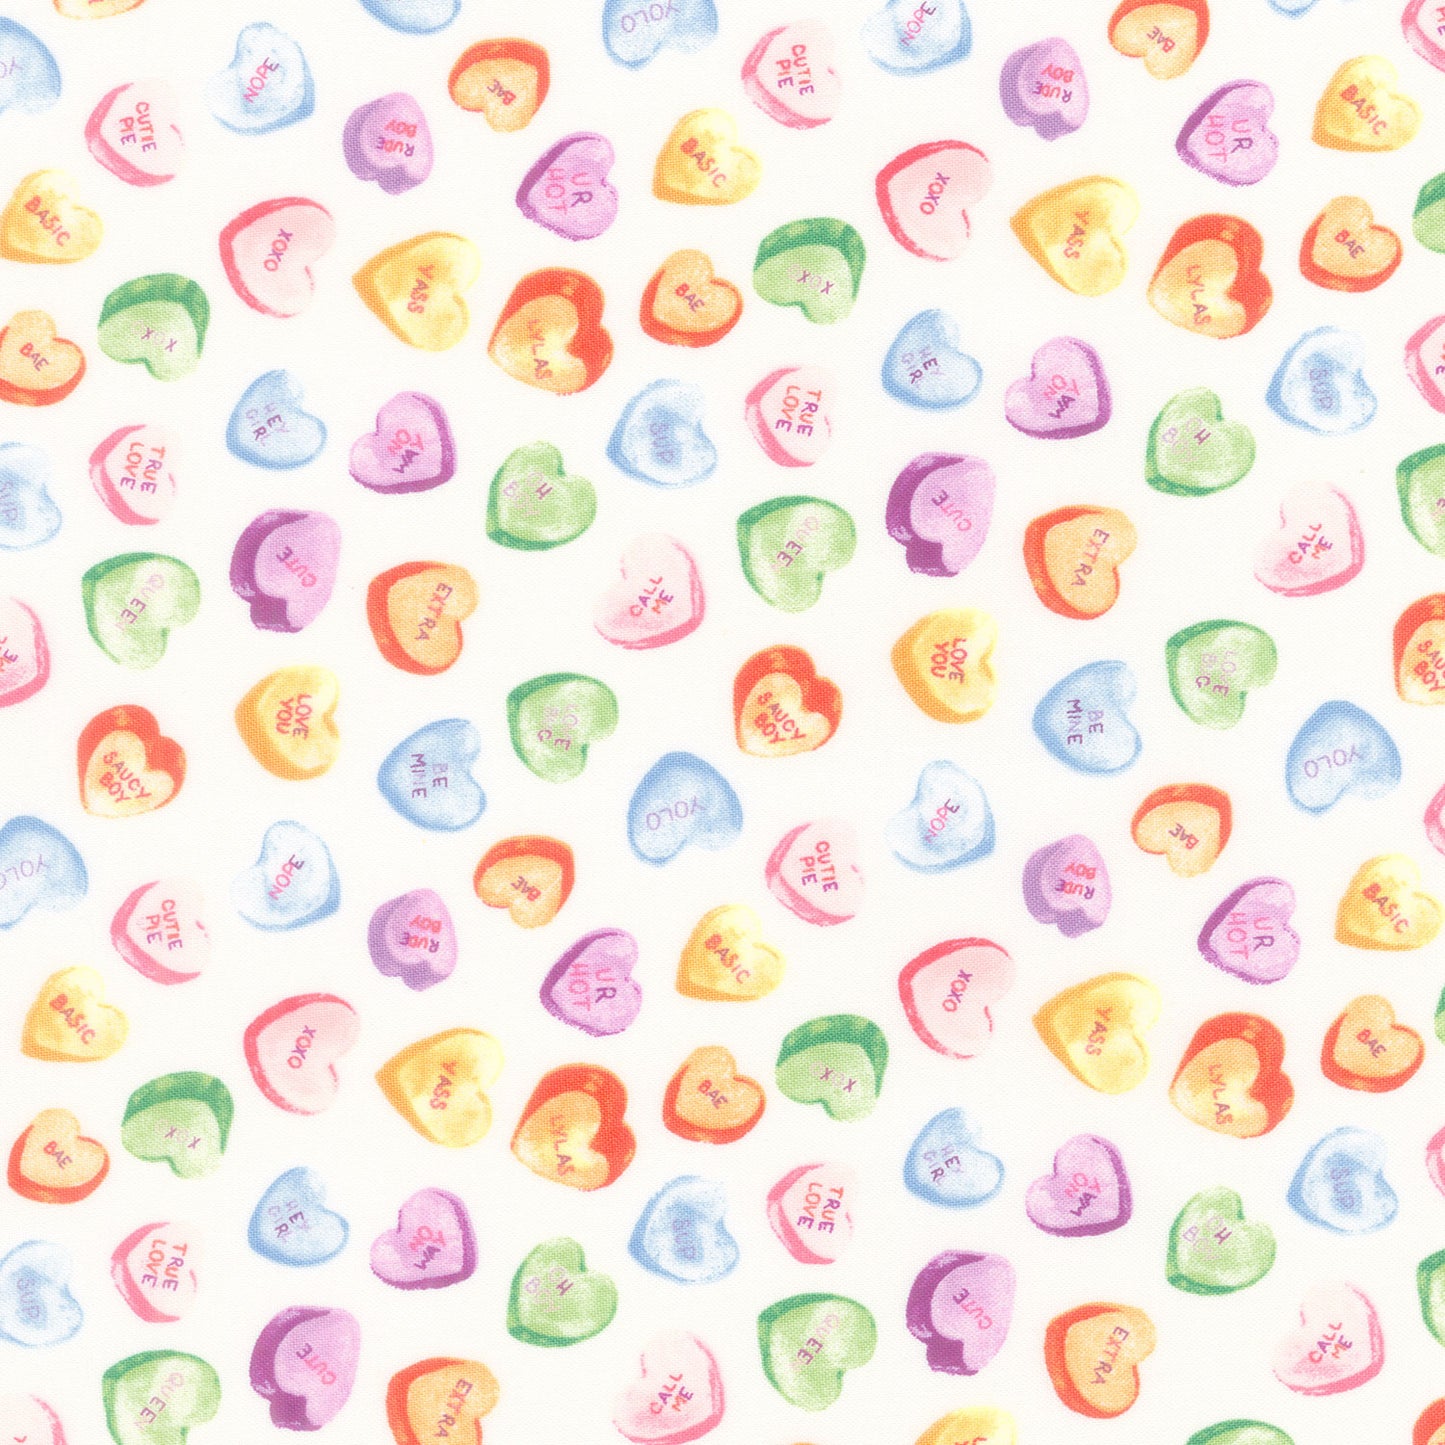 Monthly Placemat Panels - February Candy Hearts White Yardage Primary Image